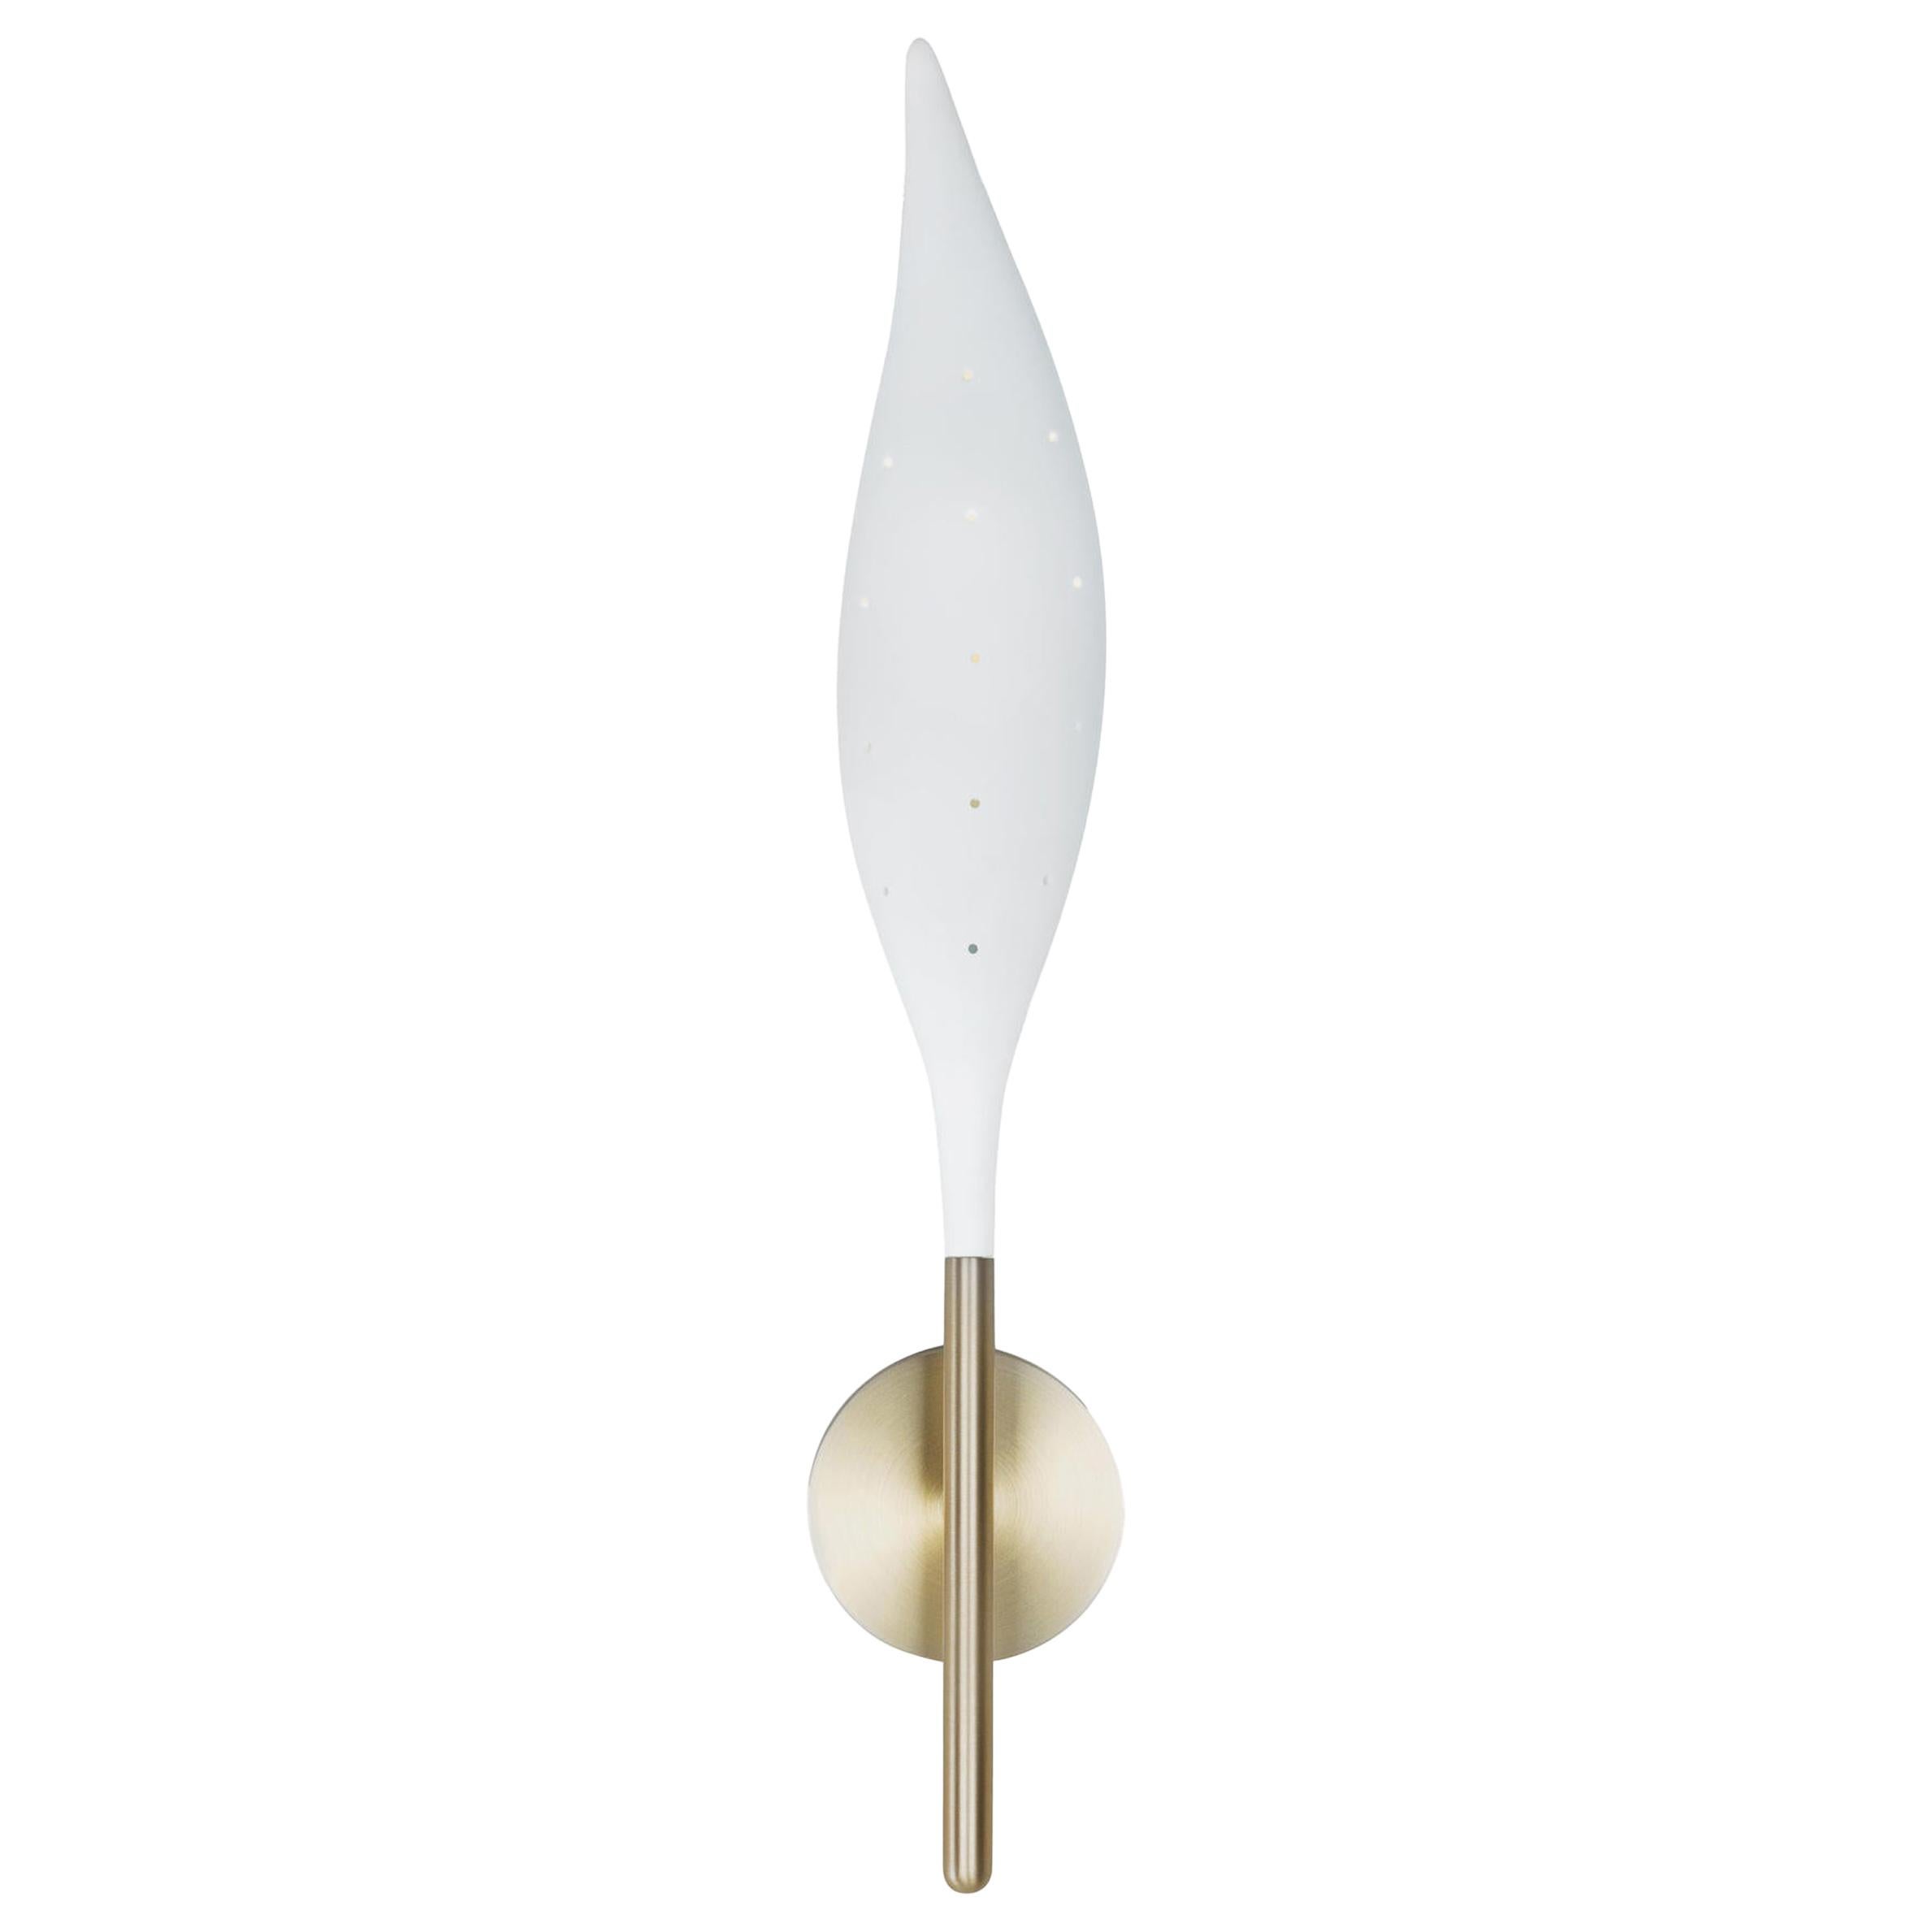 HOLLY HUNT Constellation Sconce in Brushed Brass by Damien Langlois-Meurinne